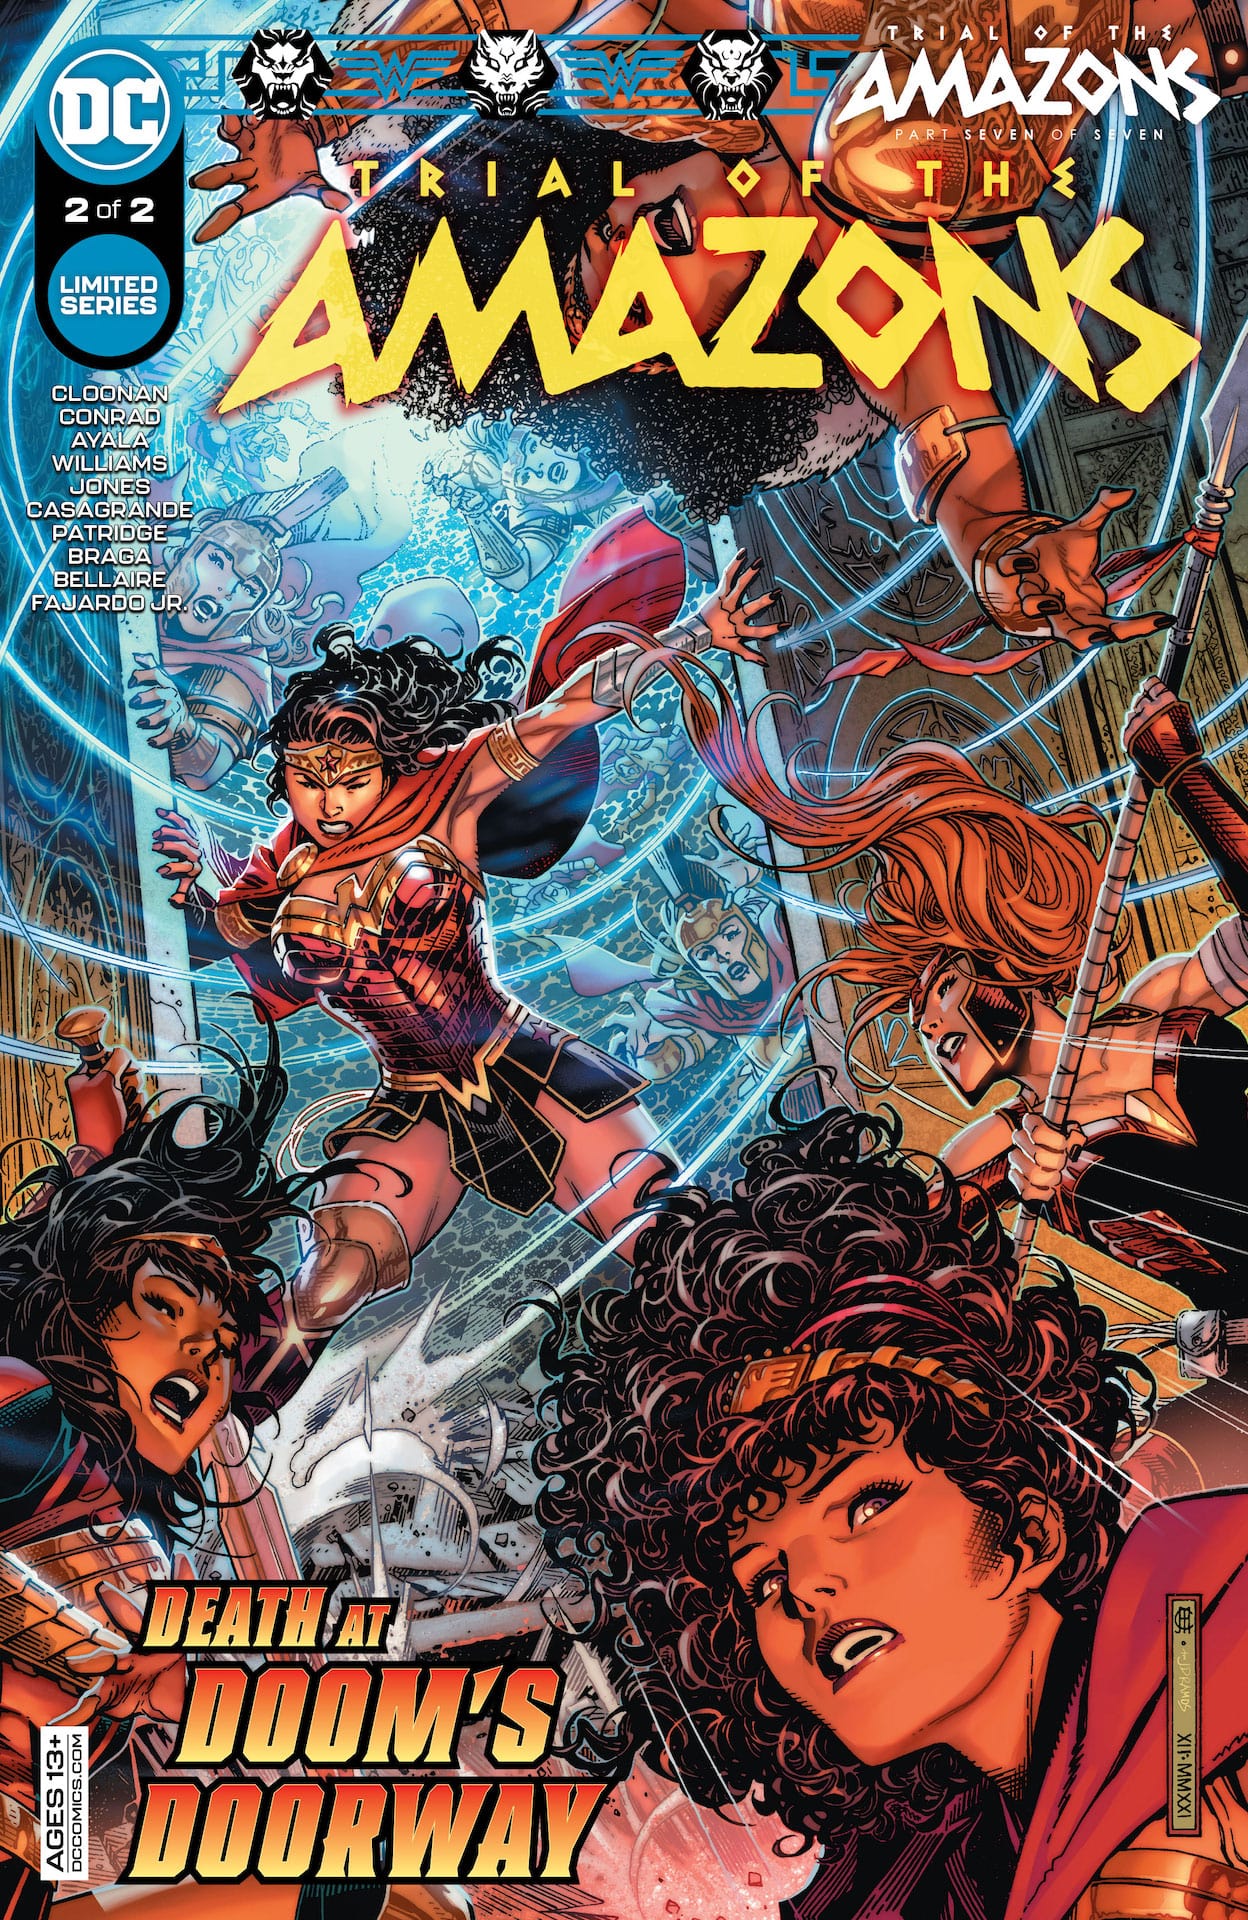 DC Preview: Trial of the Amazons #2